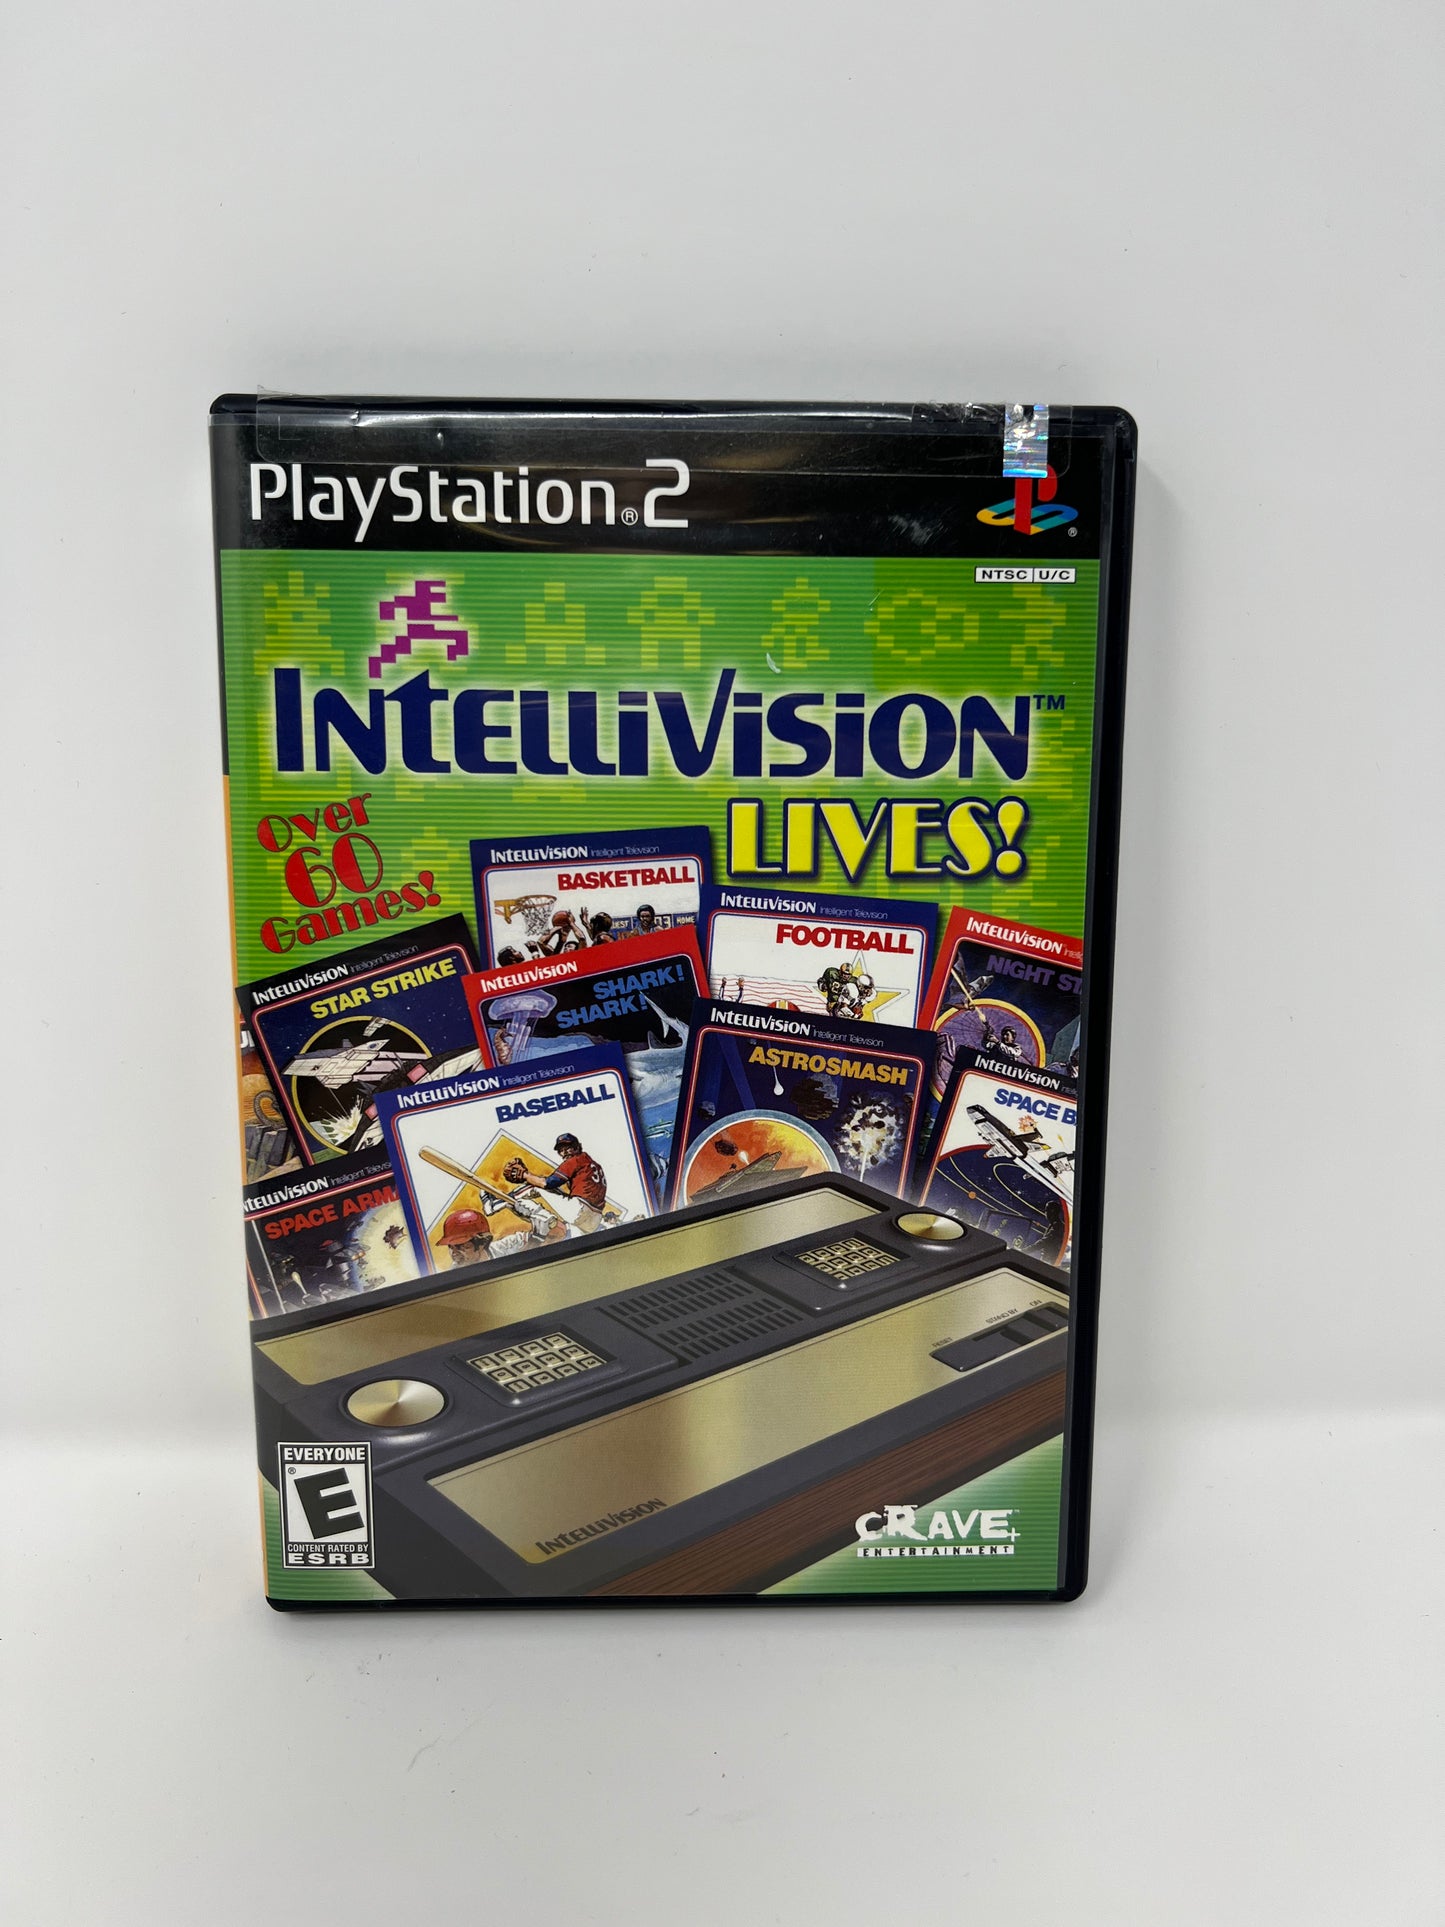 Intellivision Lives! - PS2 Game - Used